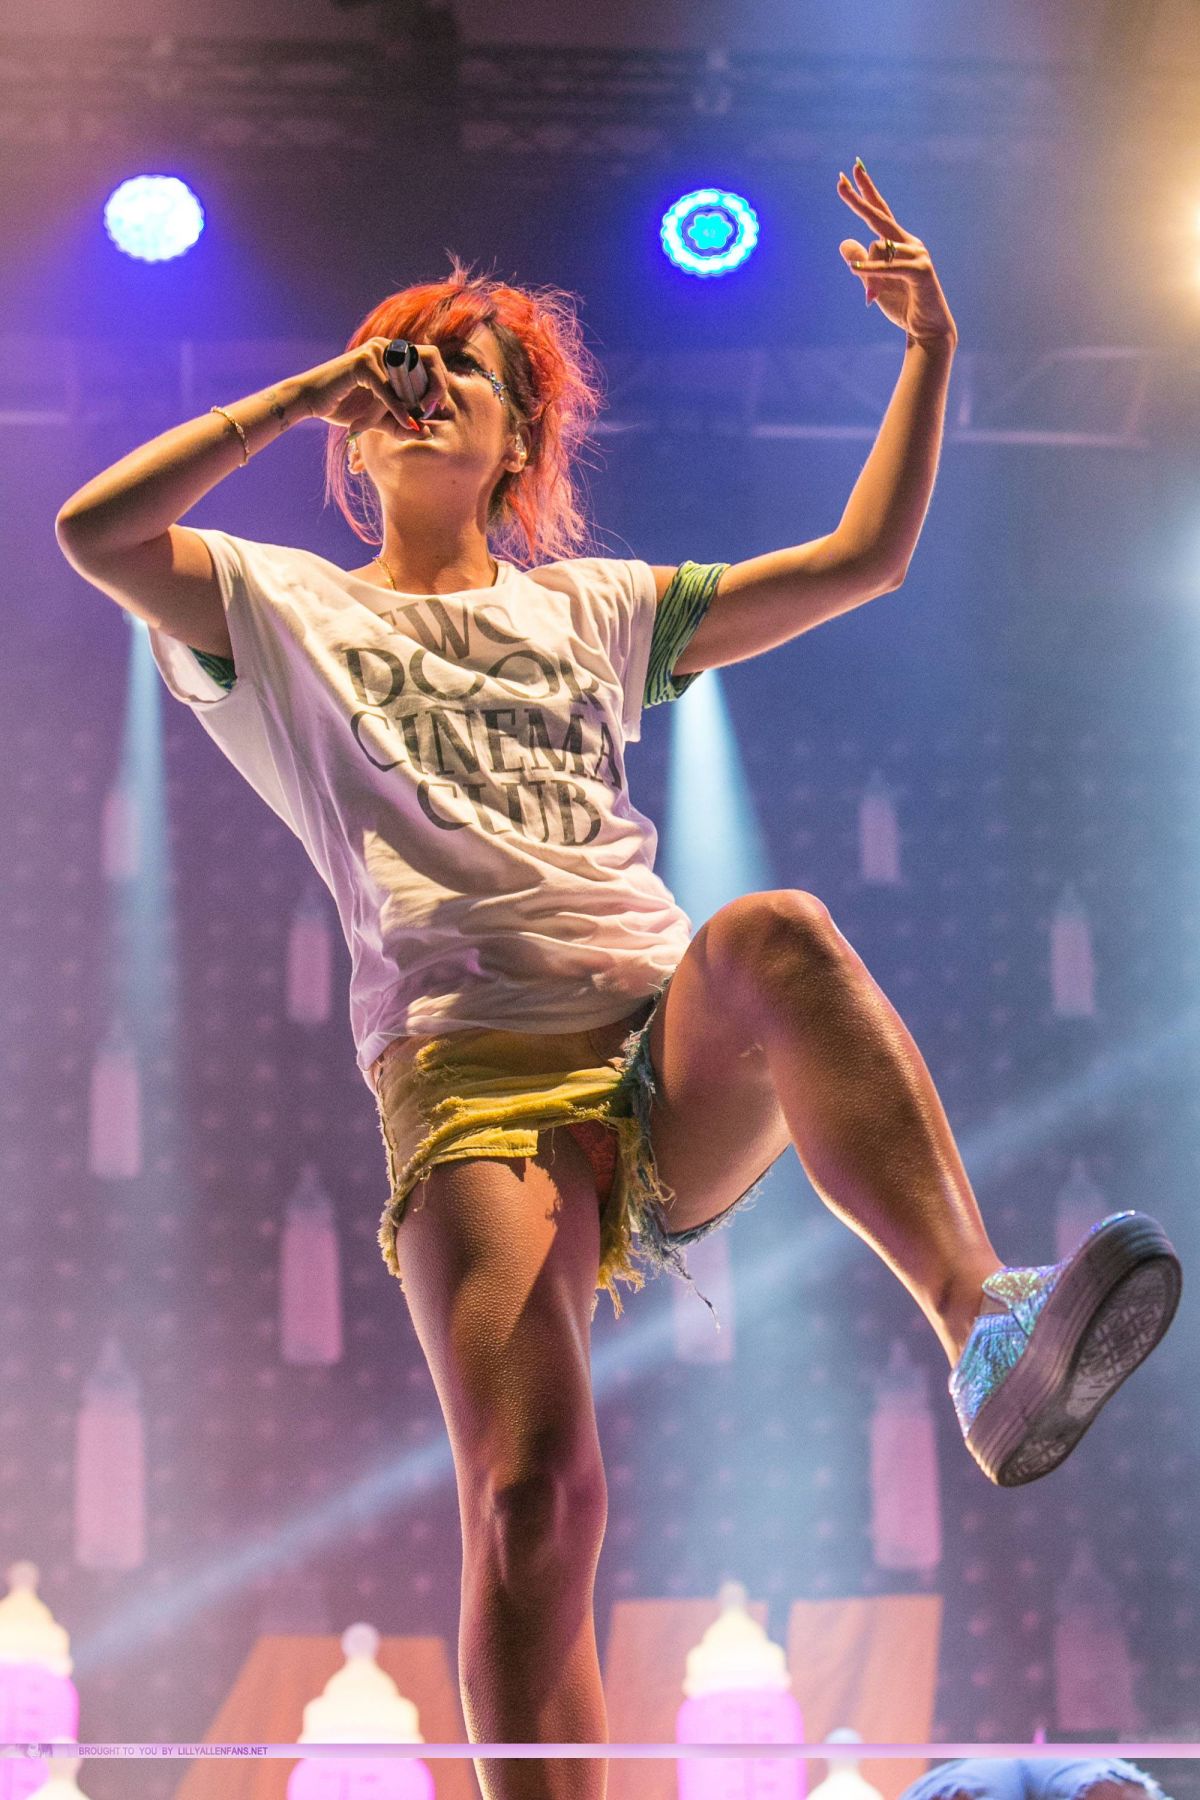 LILY ALLEN Performs at Latitude Festival.